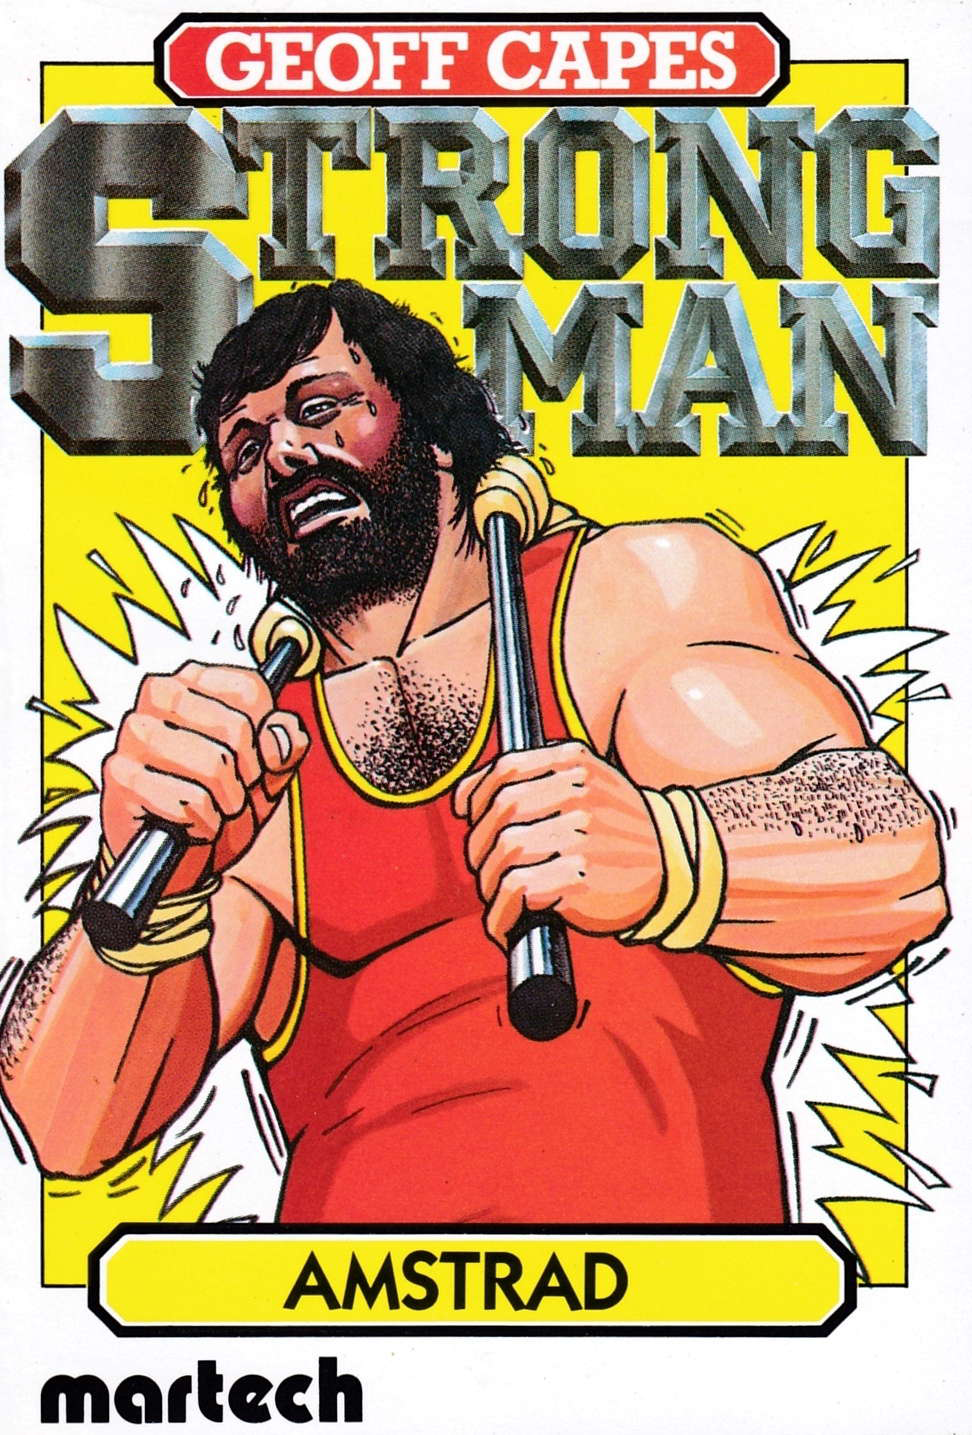 cover of the Amstrad CPC game Geoff Capes Strongman  by GameBase CPC